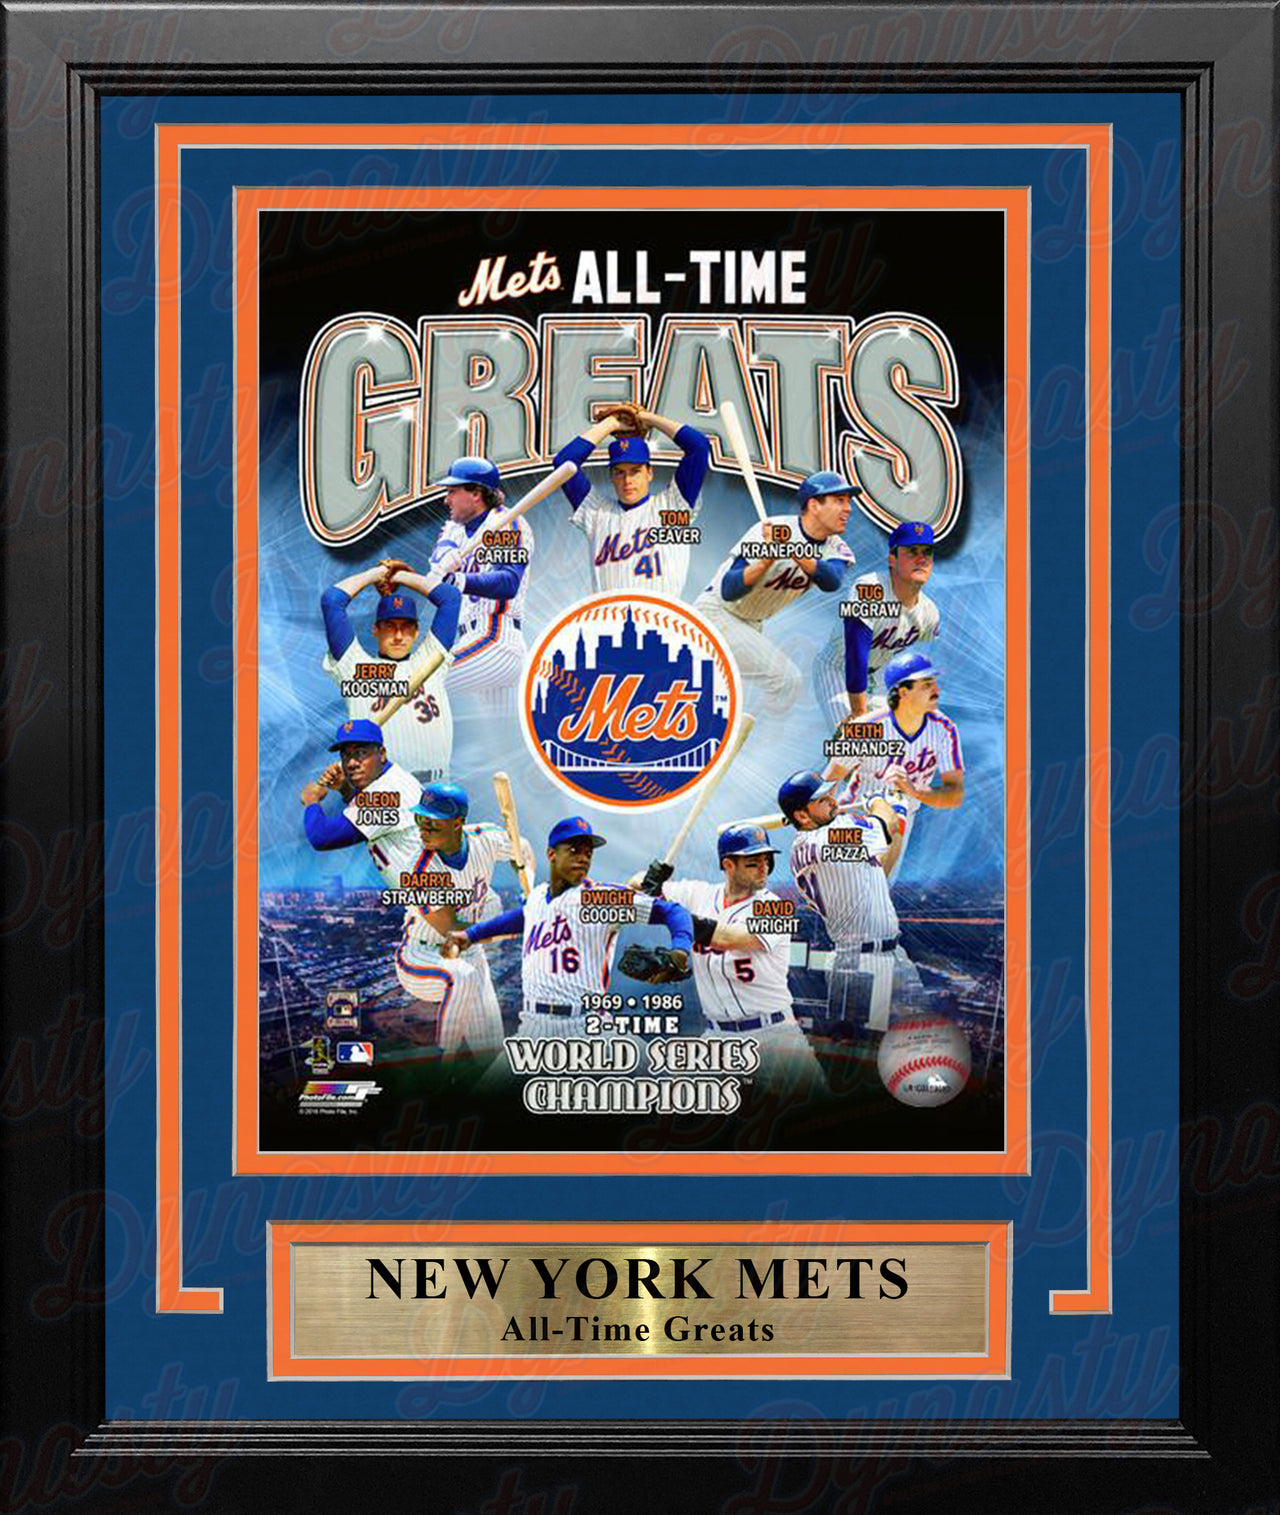 New York Mets All-Time Greats 8" x 10" Framed Baseball Photo - Dynasty Sports & Framing 